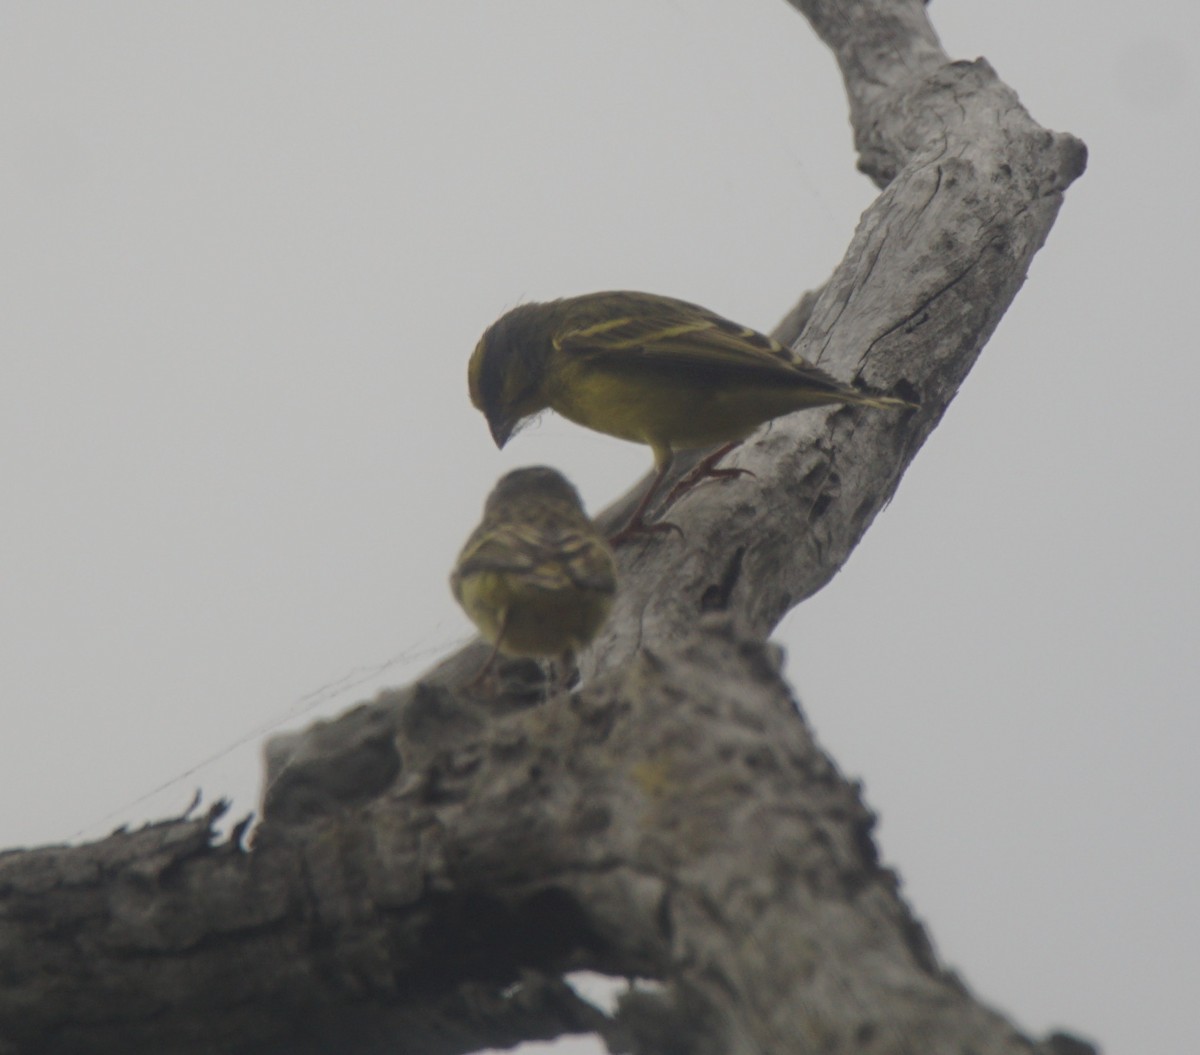 Yellow-fronted Canary - Nevine Jacob